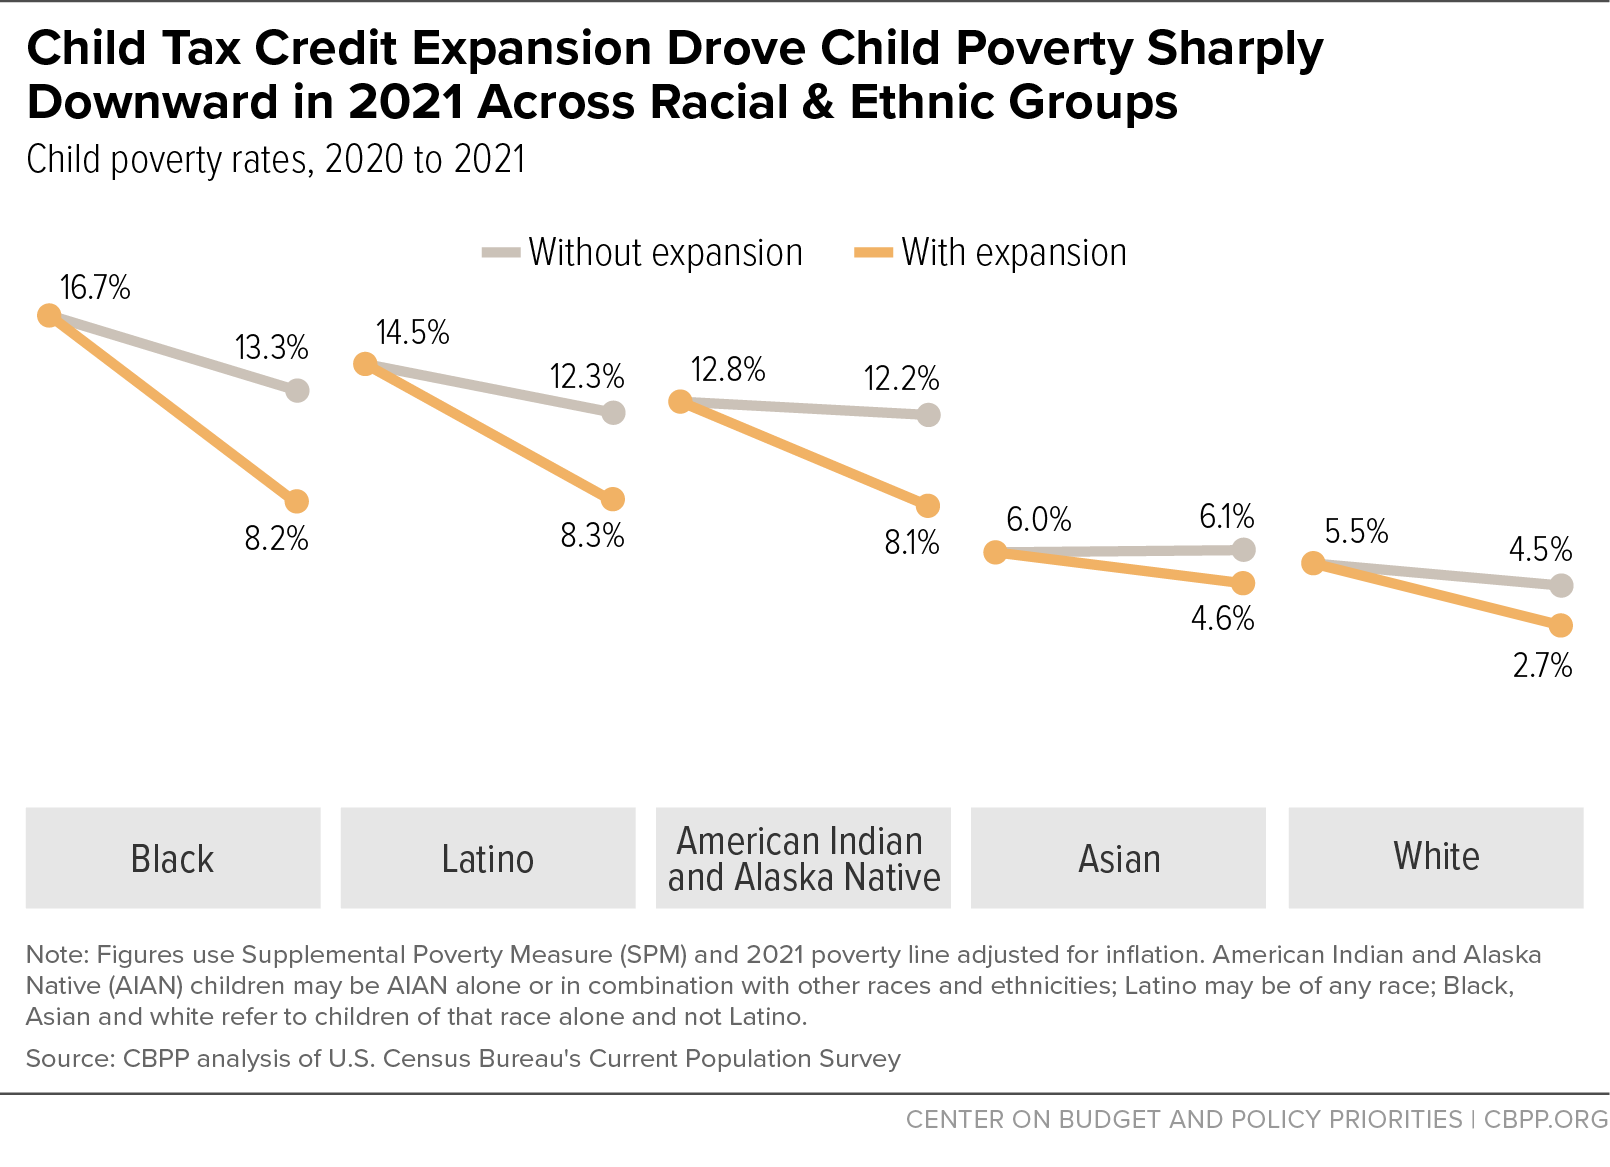 Child Tax Credit Expansion Drove Child Poverty Sharply Downward in 2021 Across Racial & Ethnic Groups